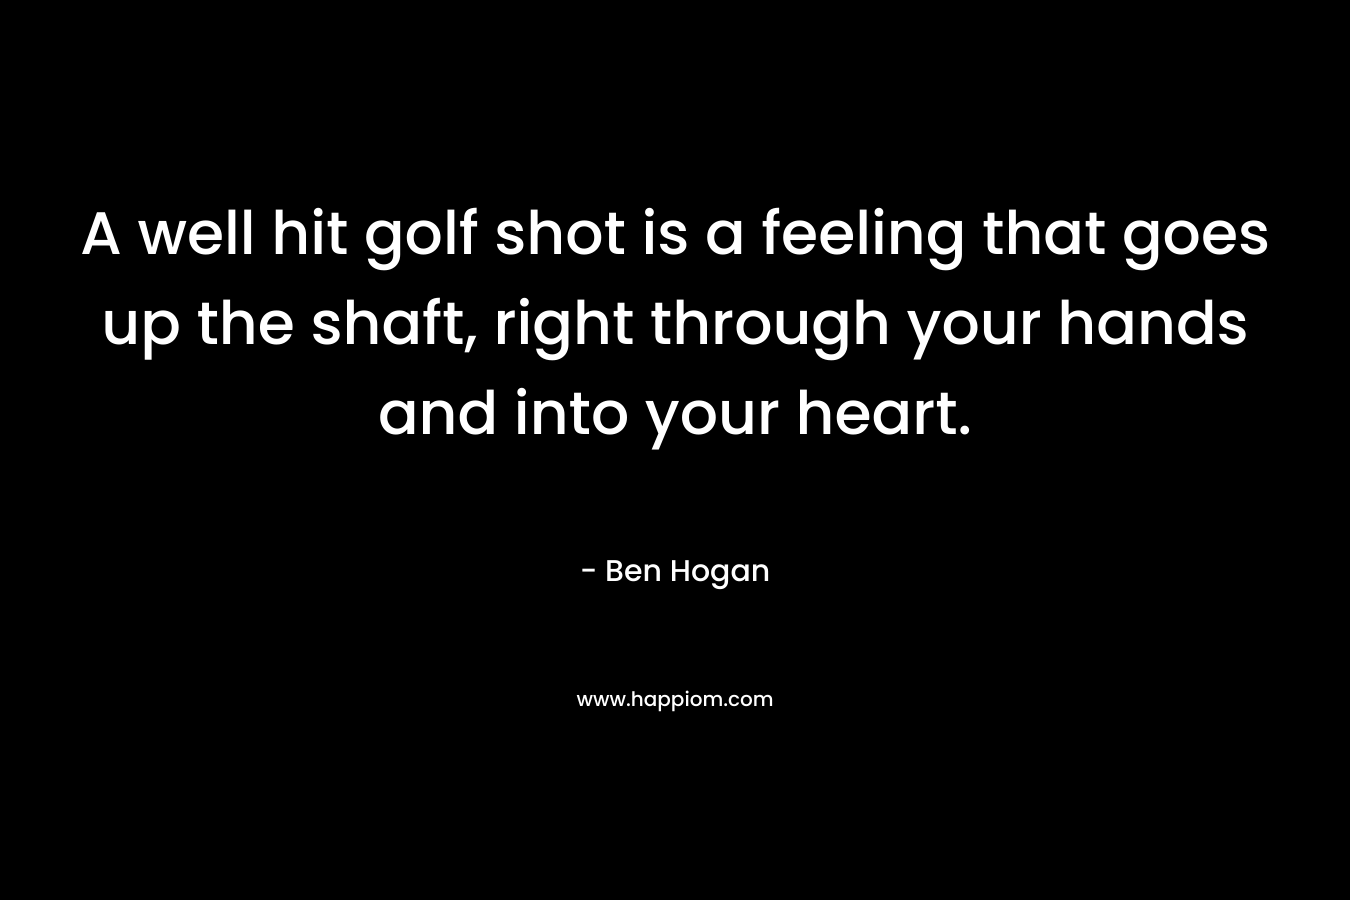 A well hit golf shot is a feeling that goes up the shaft, right through your hands and into your heart. – Ben Hogan